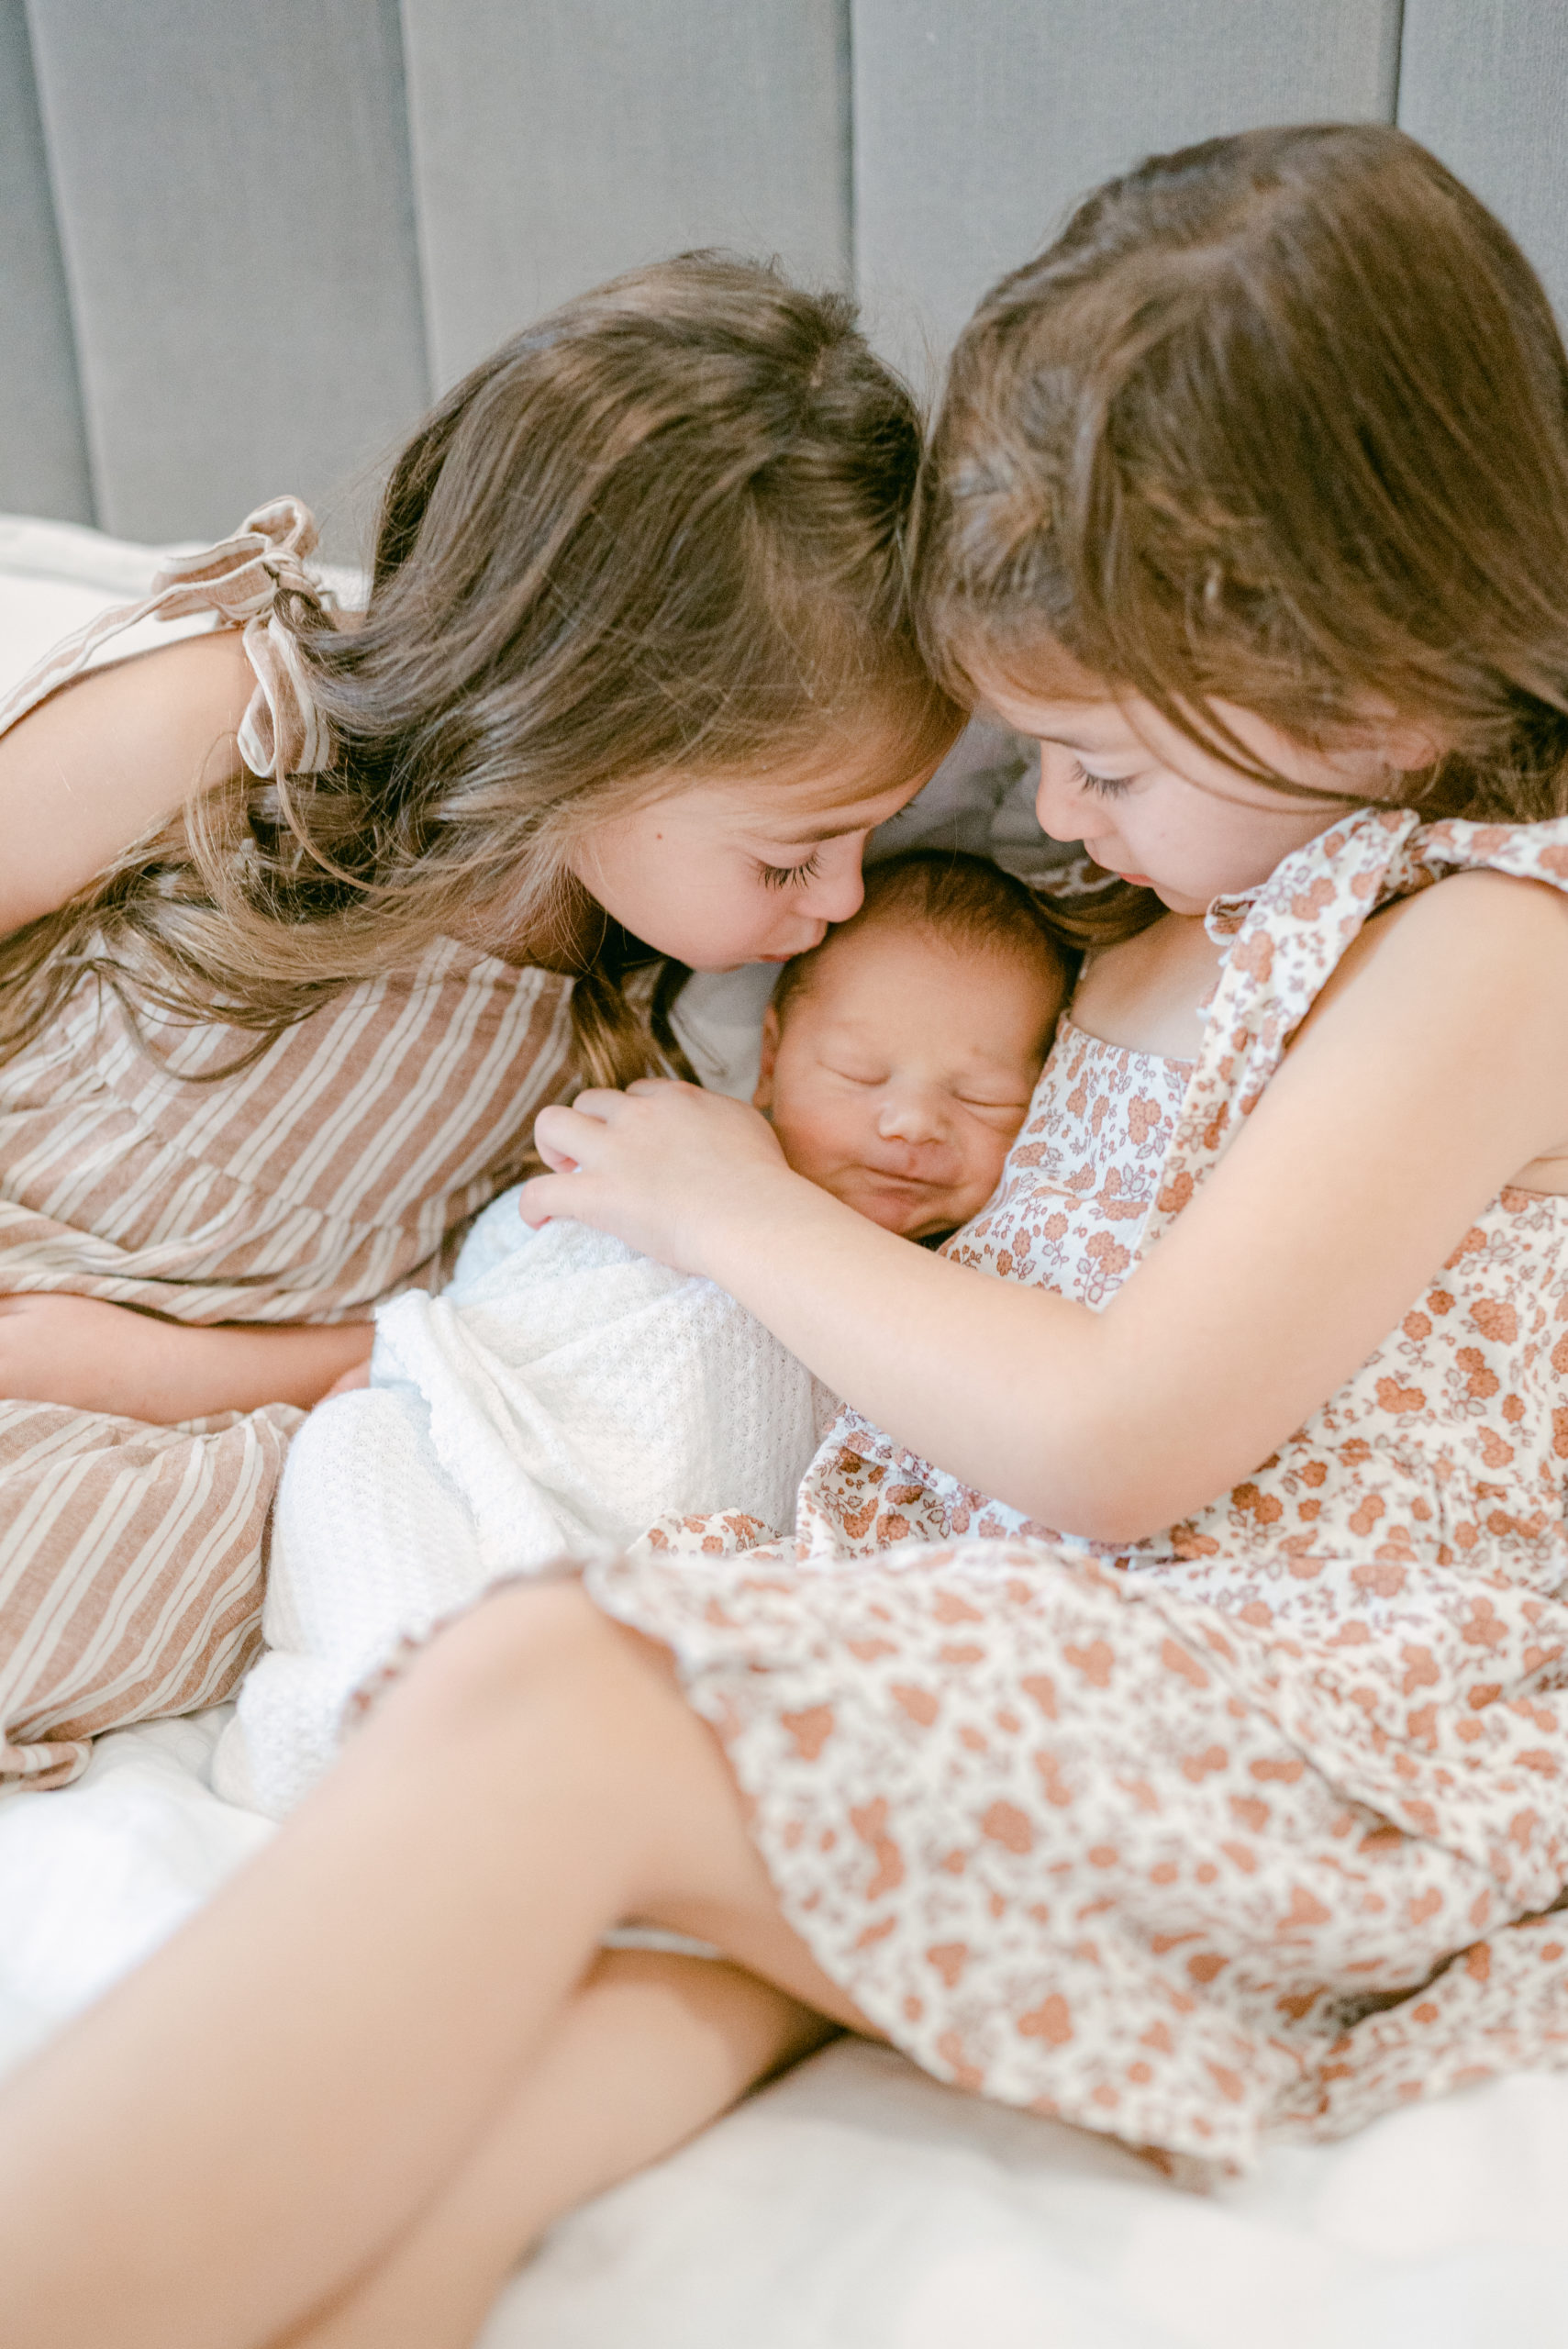 Twin girls kissing their newborn baby brother